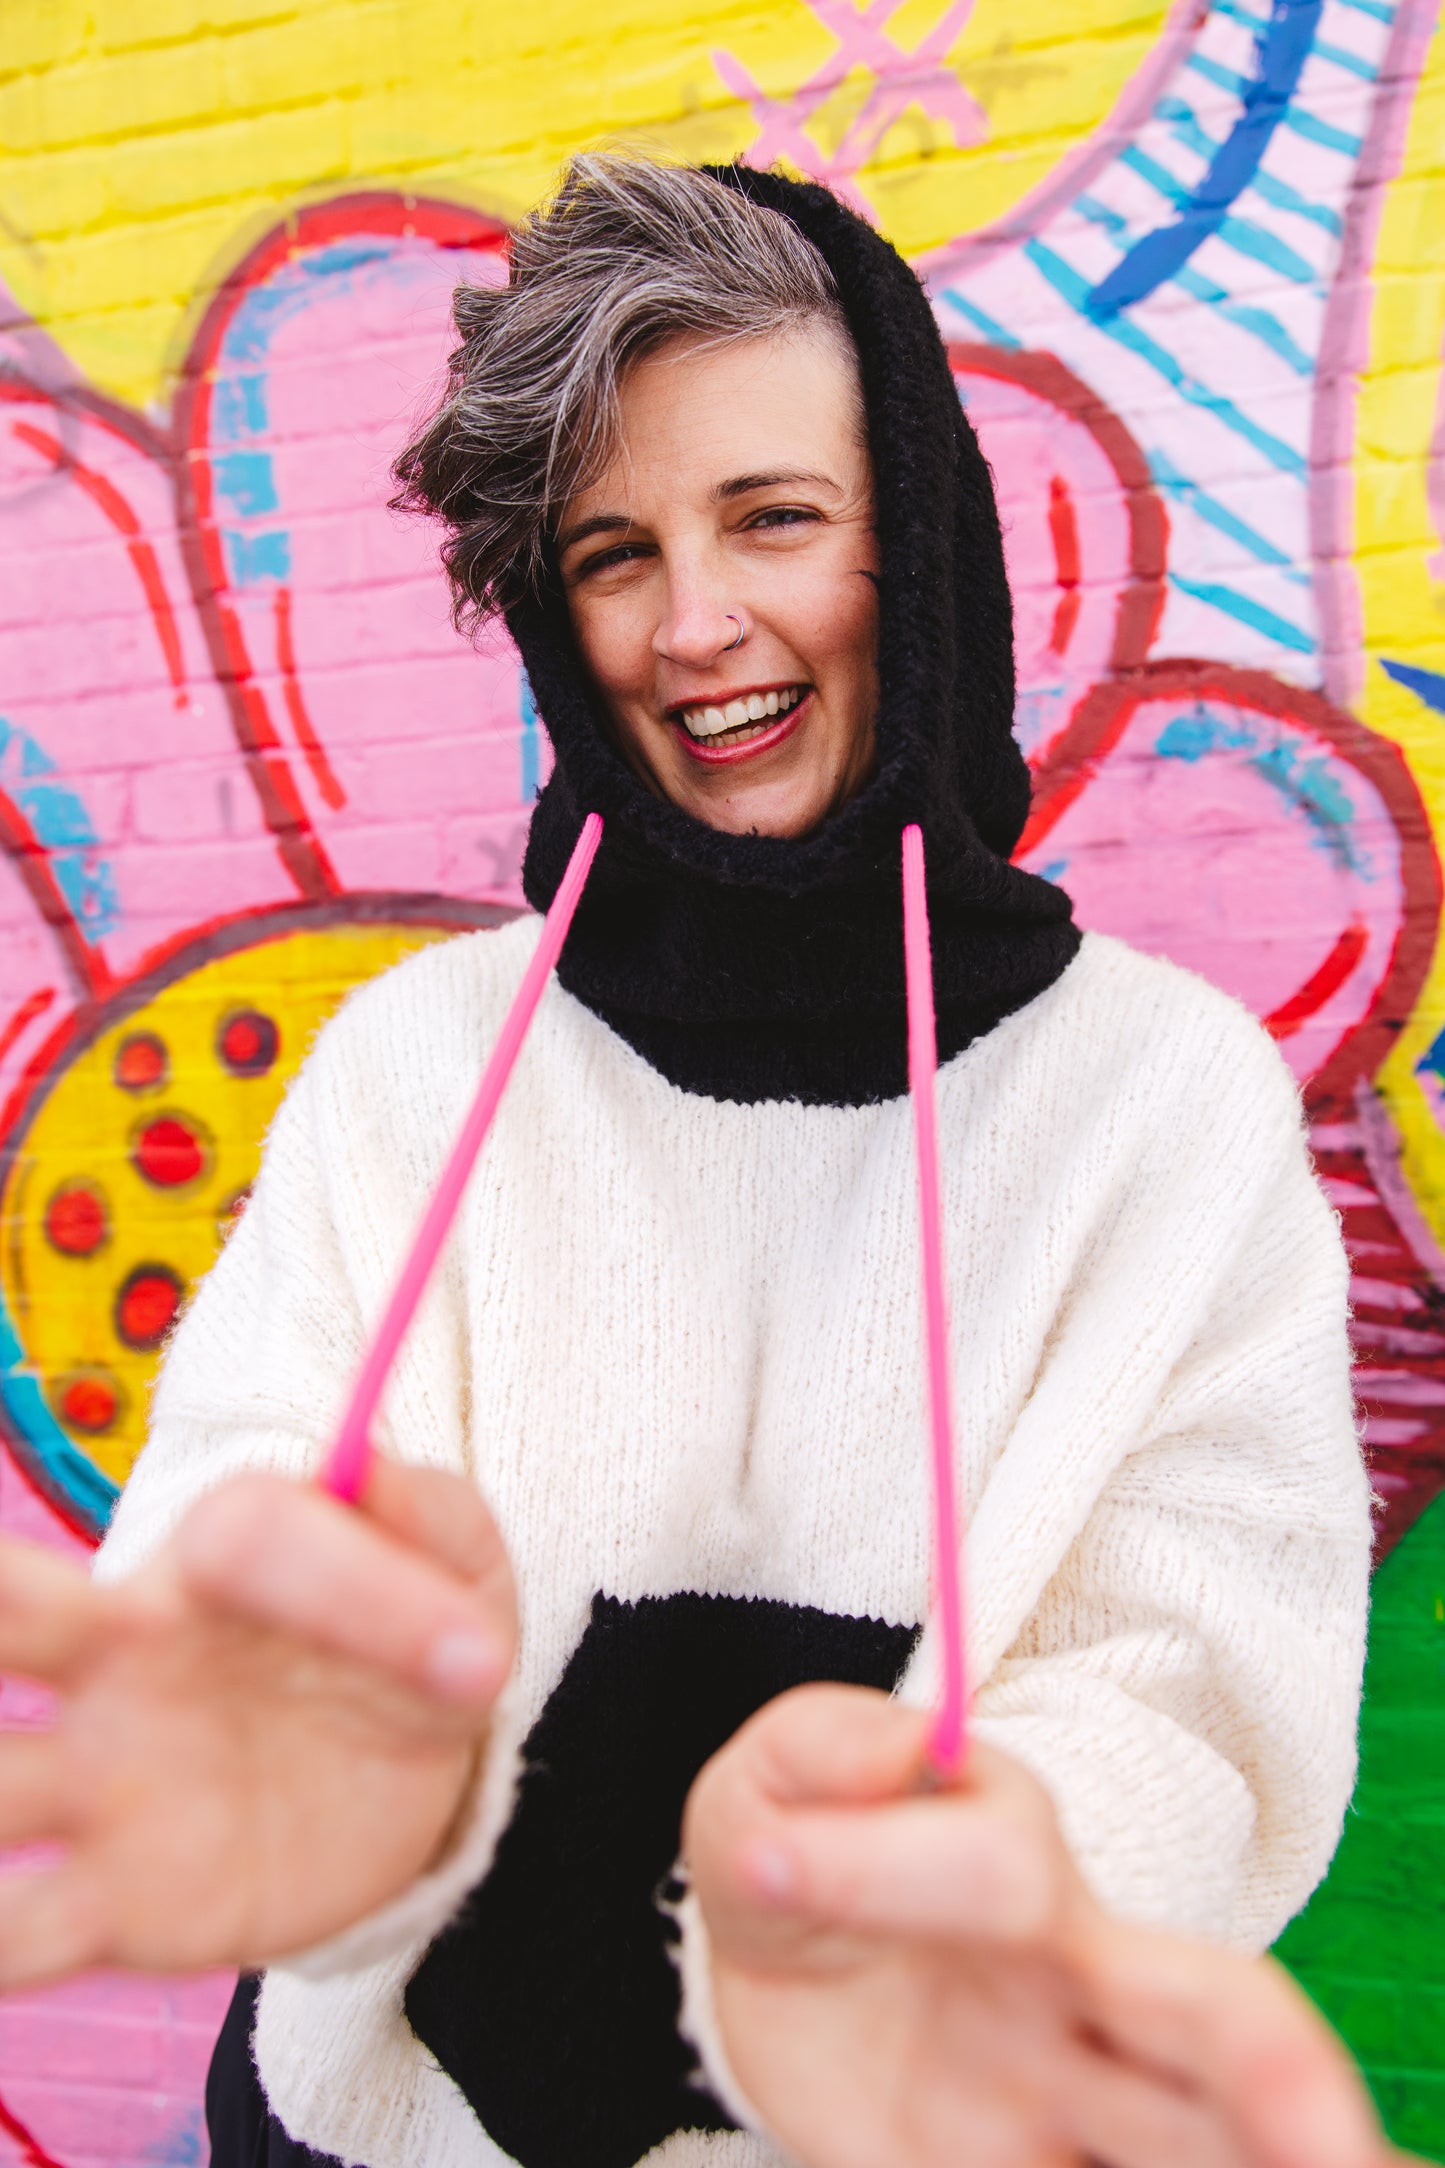 Jen smiles at the camera, pulling on the pink strings of the black and white knit hoodie she wears. A wall mural can be seen in the background.